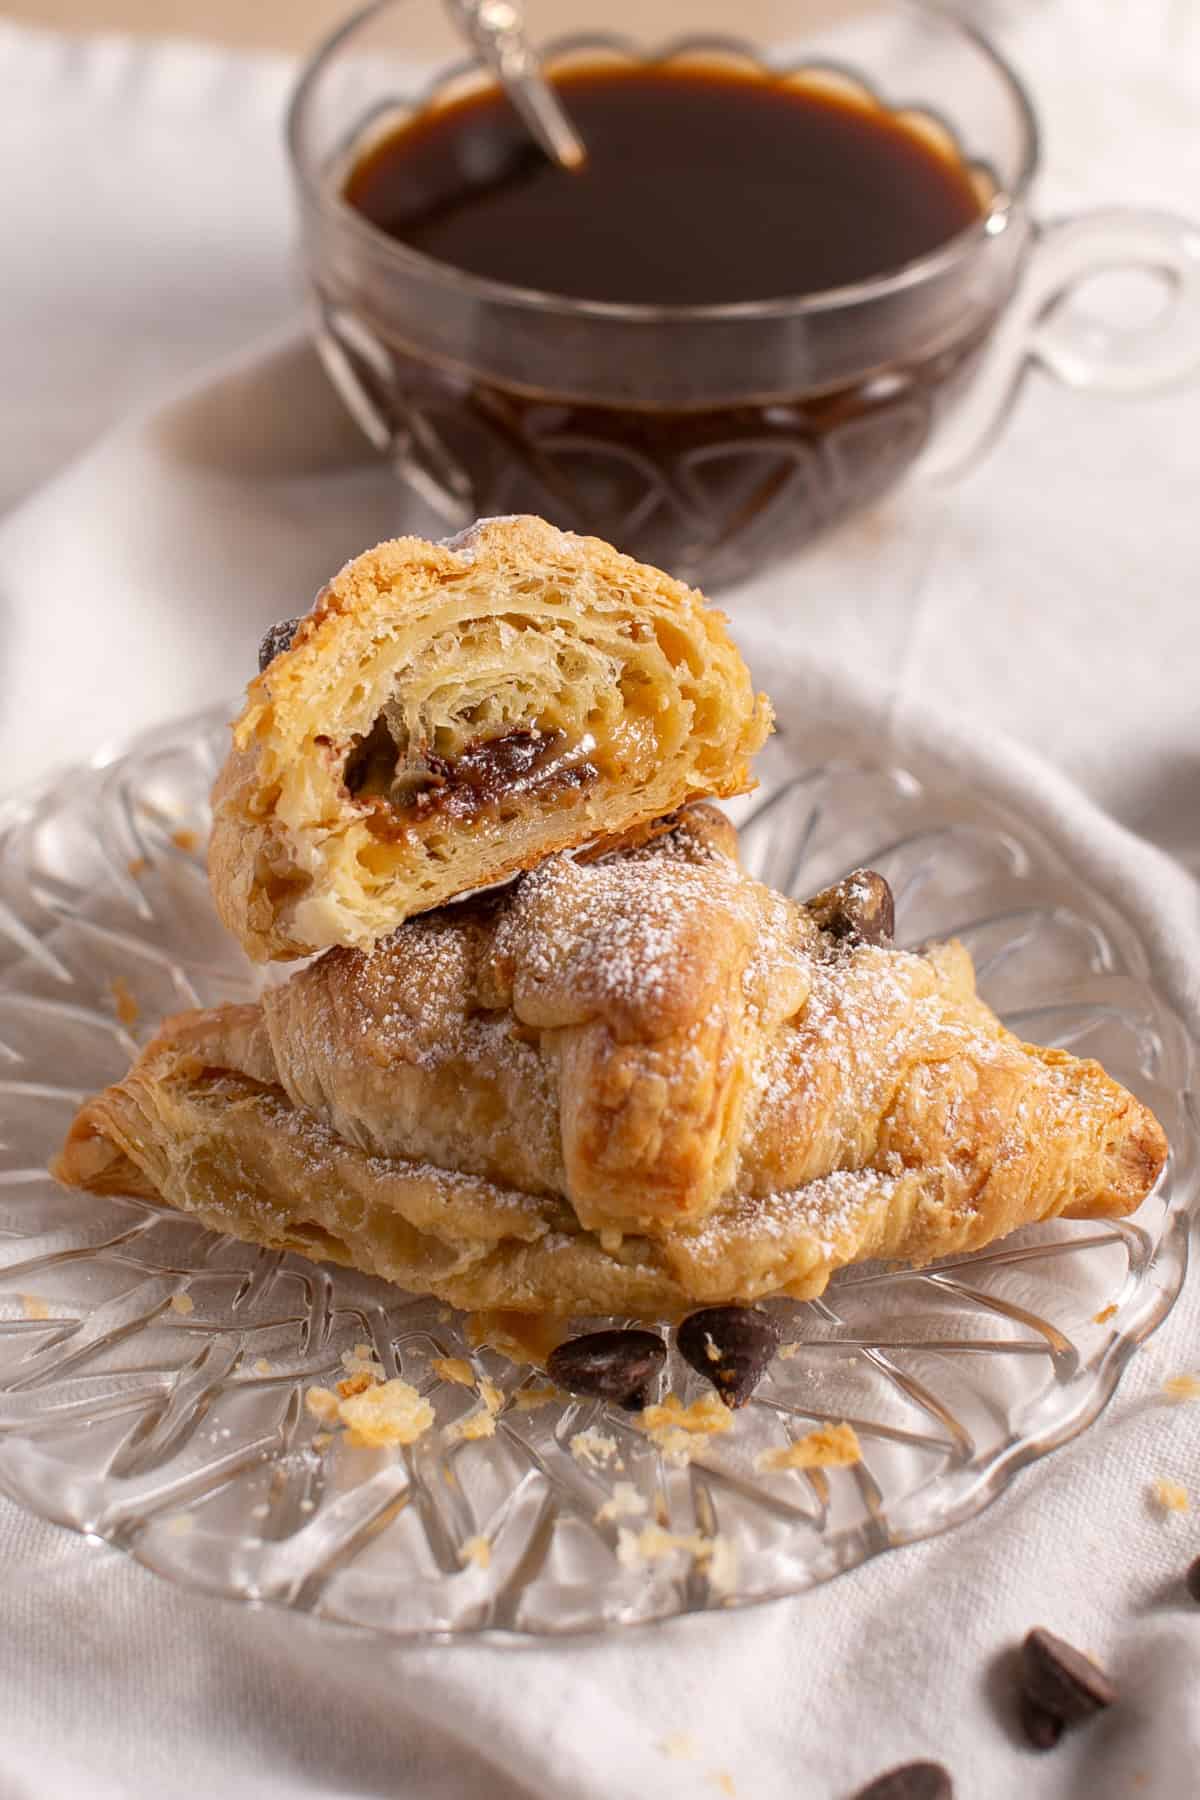 Chocolate Chip Cookie Croissant cut in half by a cup of coffee.